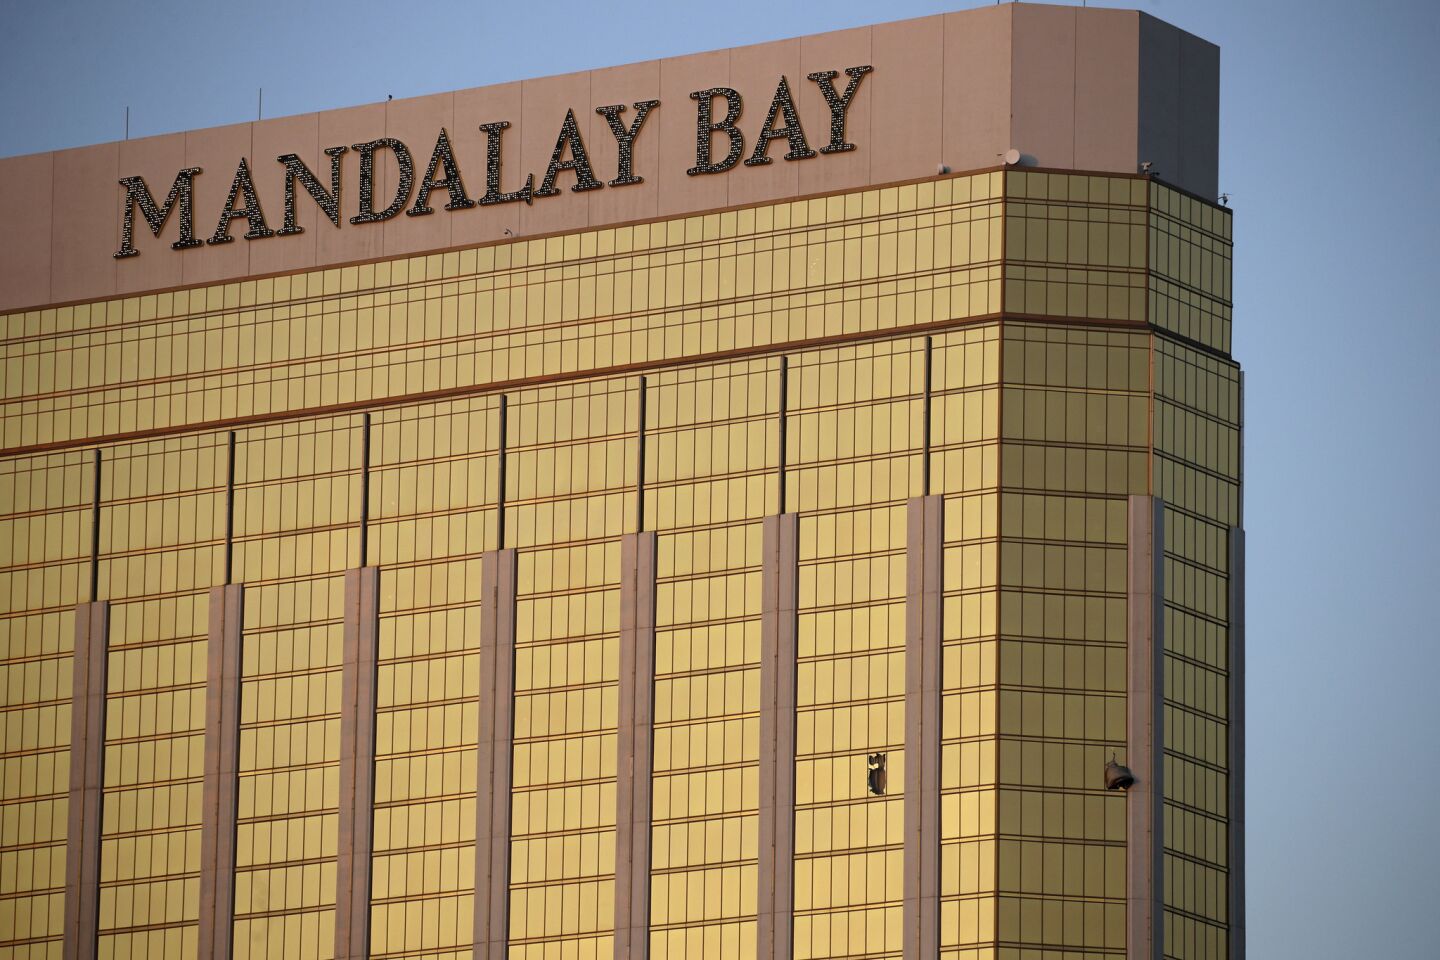 Drapes billow from broken windows Monday at the Mandalay Bay Resort and Casino on the Las Vegas Strip. Police say gunman Stephen Paddock targeted festival-goers from the resort and was found dead inside a hotel room.